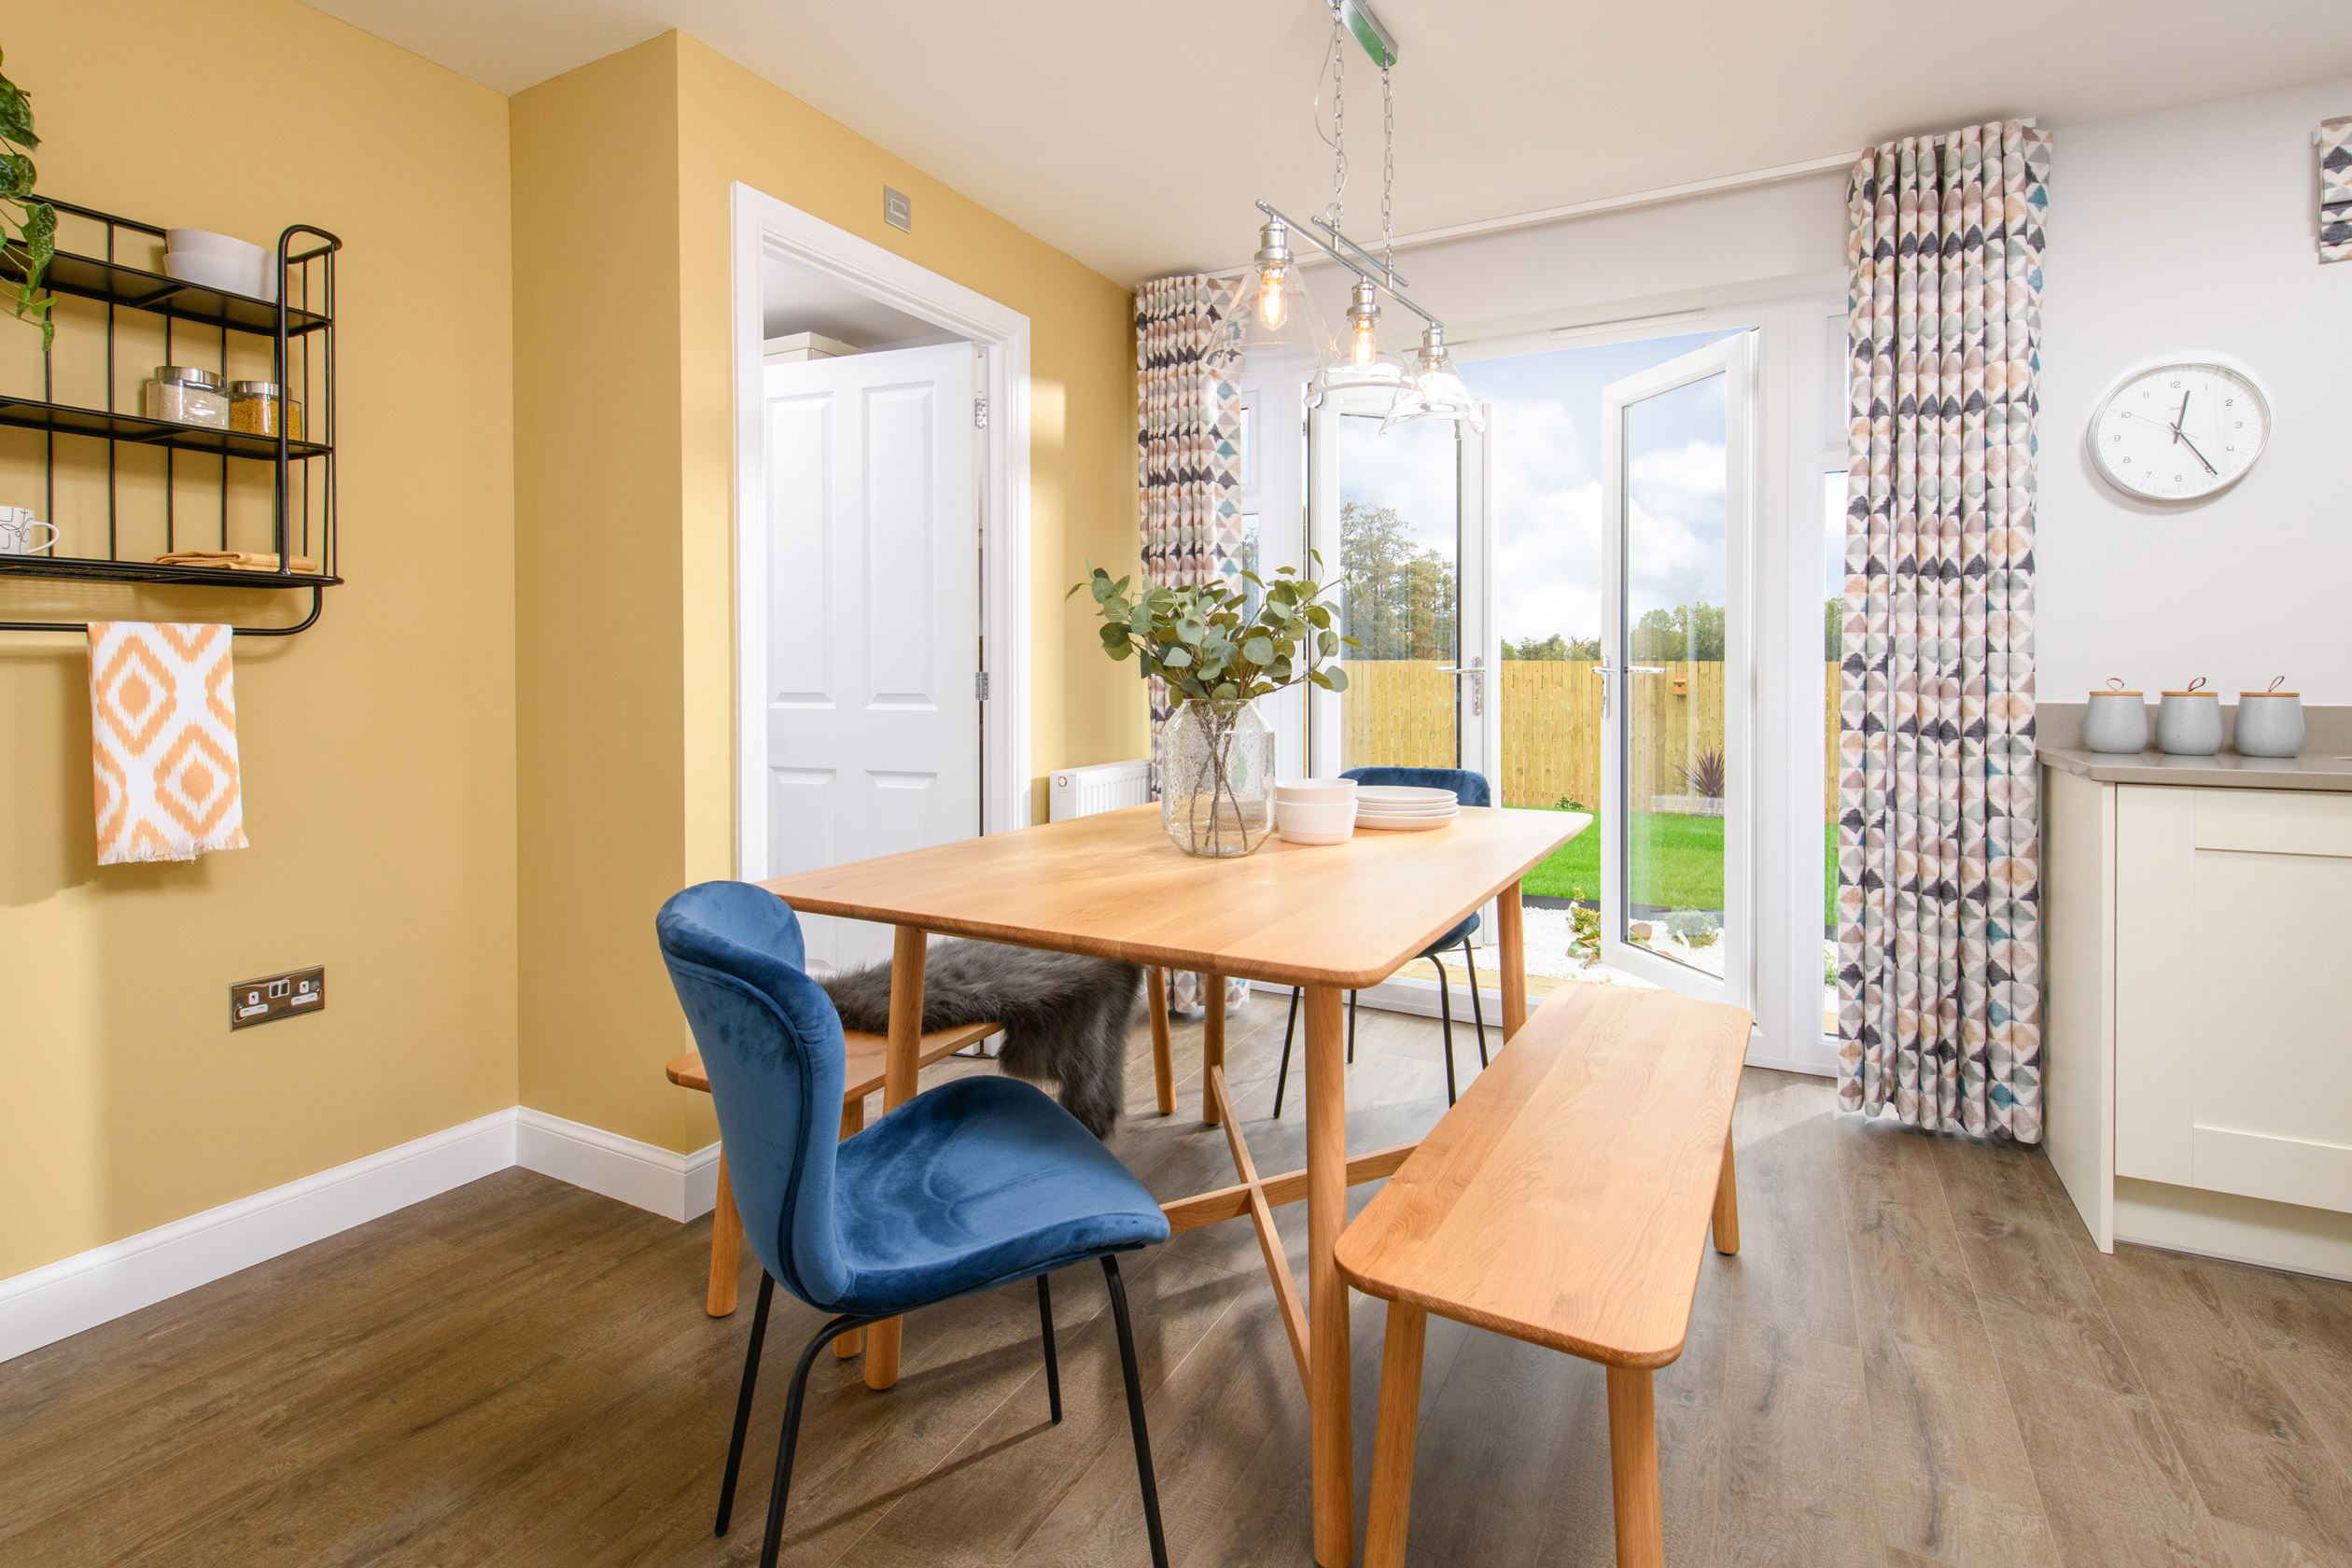 Property 3 of 9. Dining Area With French Doors In The Abbeydale 3 Bedroom Show Home